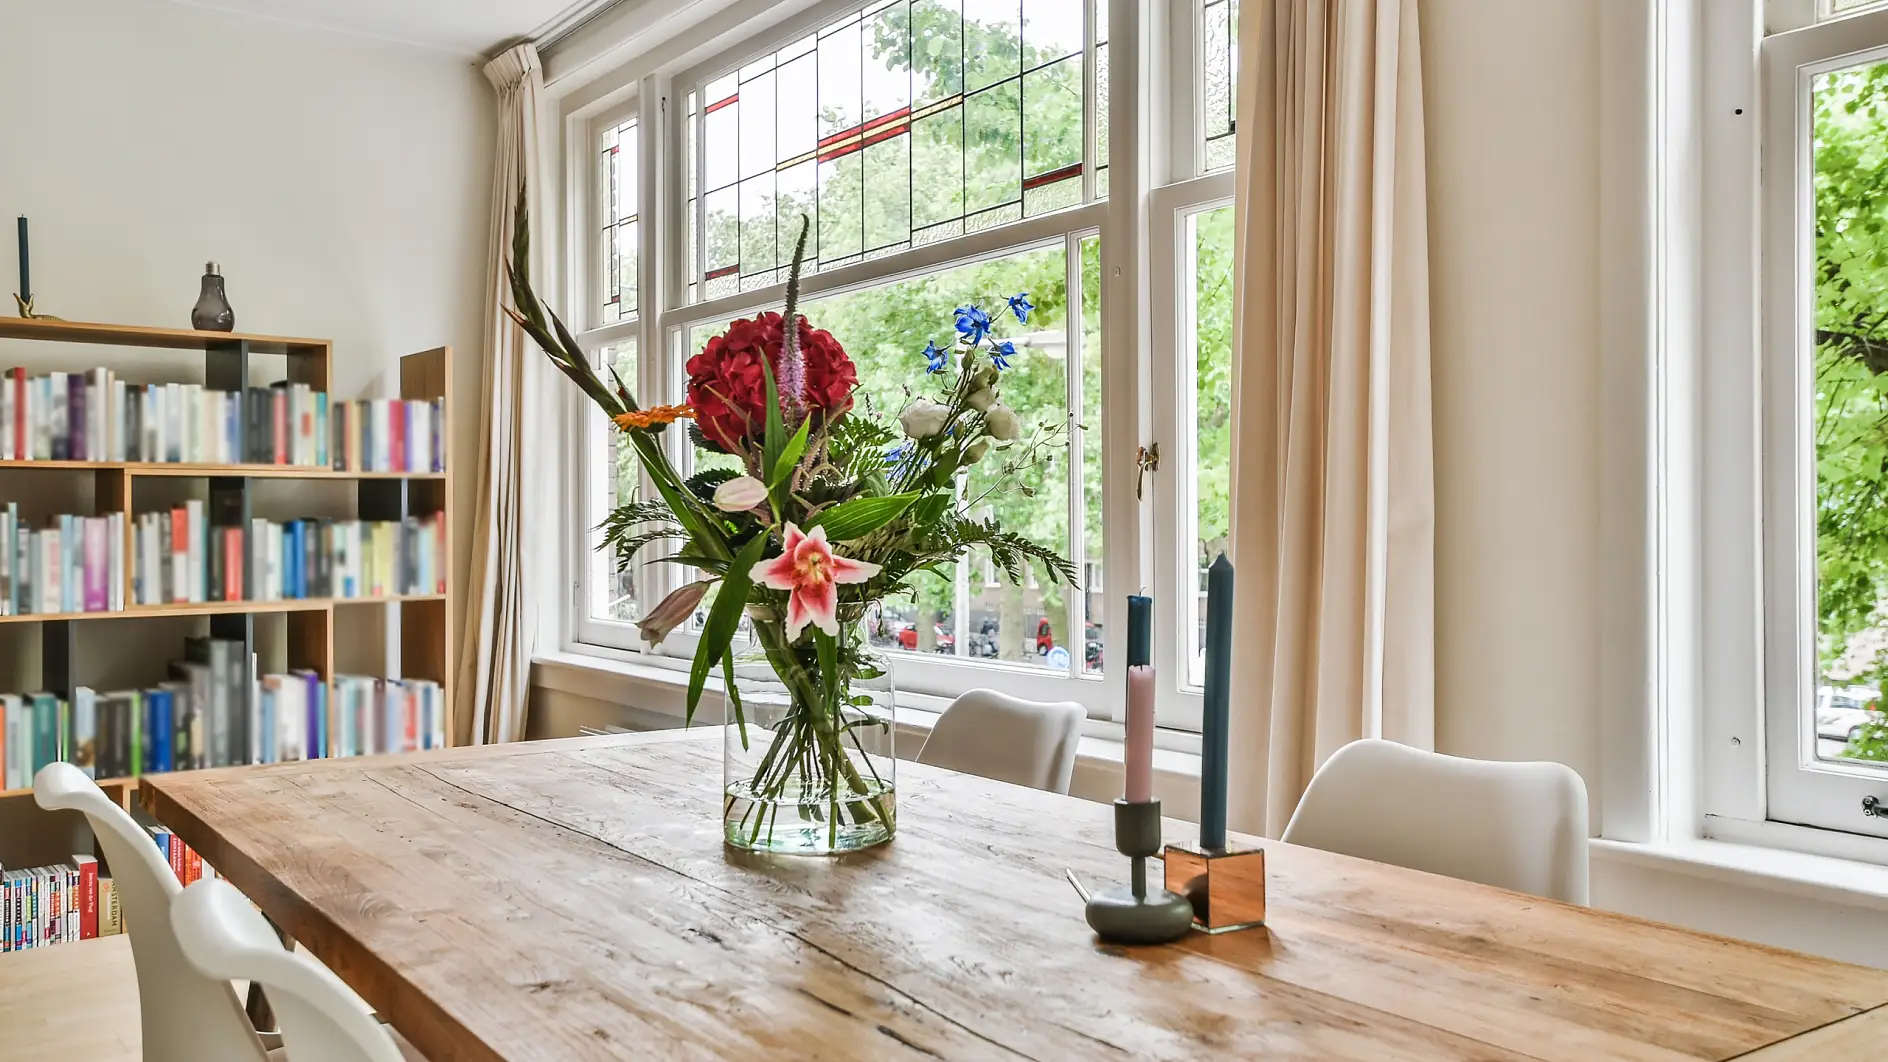 Glass vase with fresh flowers and stylish candles placed on wooden table against windows and bookcase in light dining room